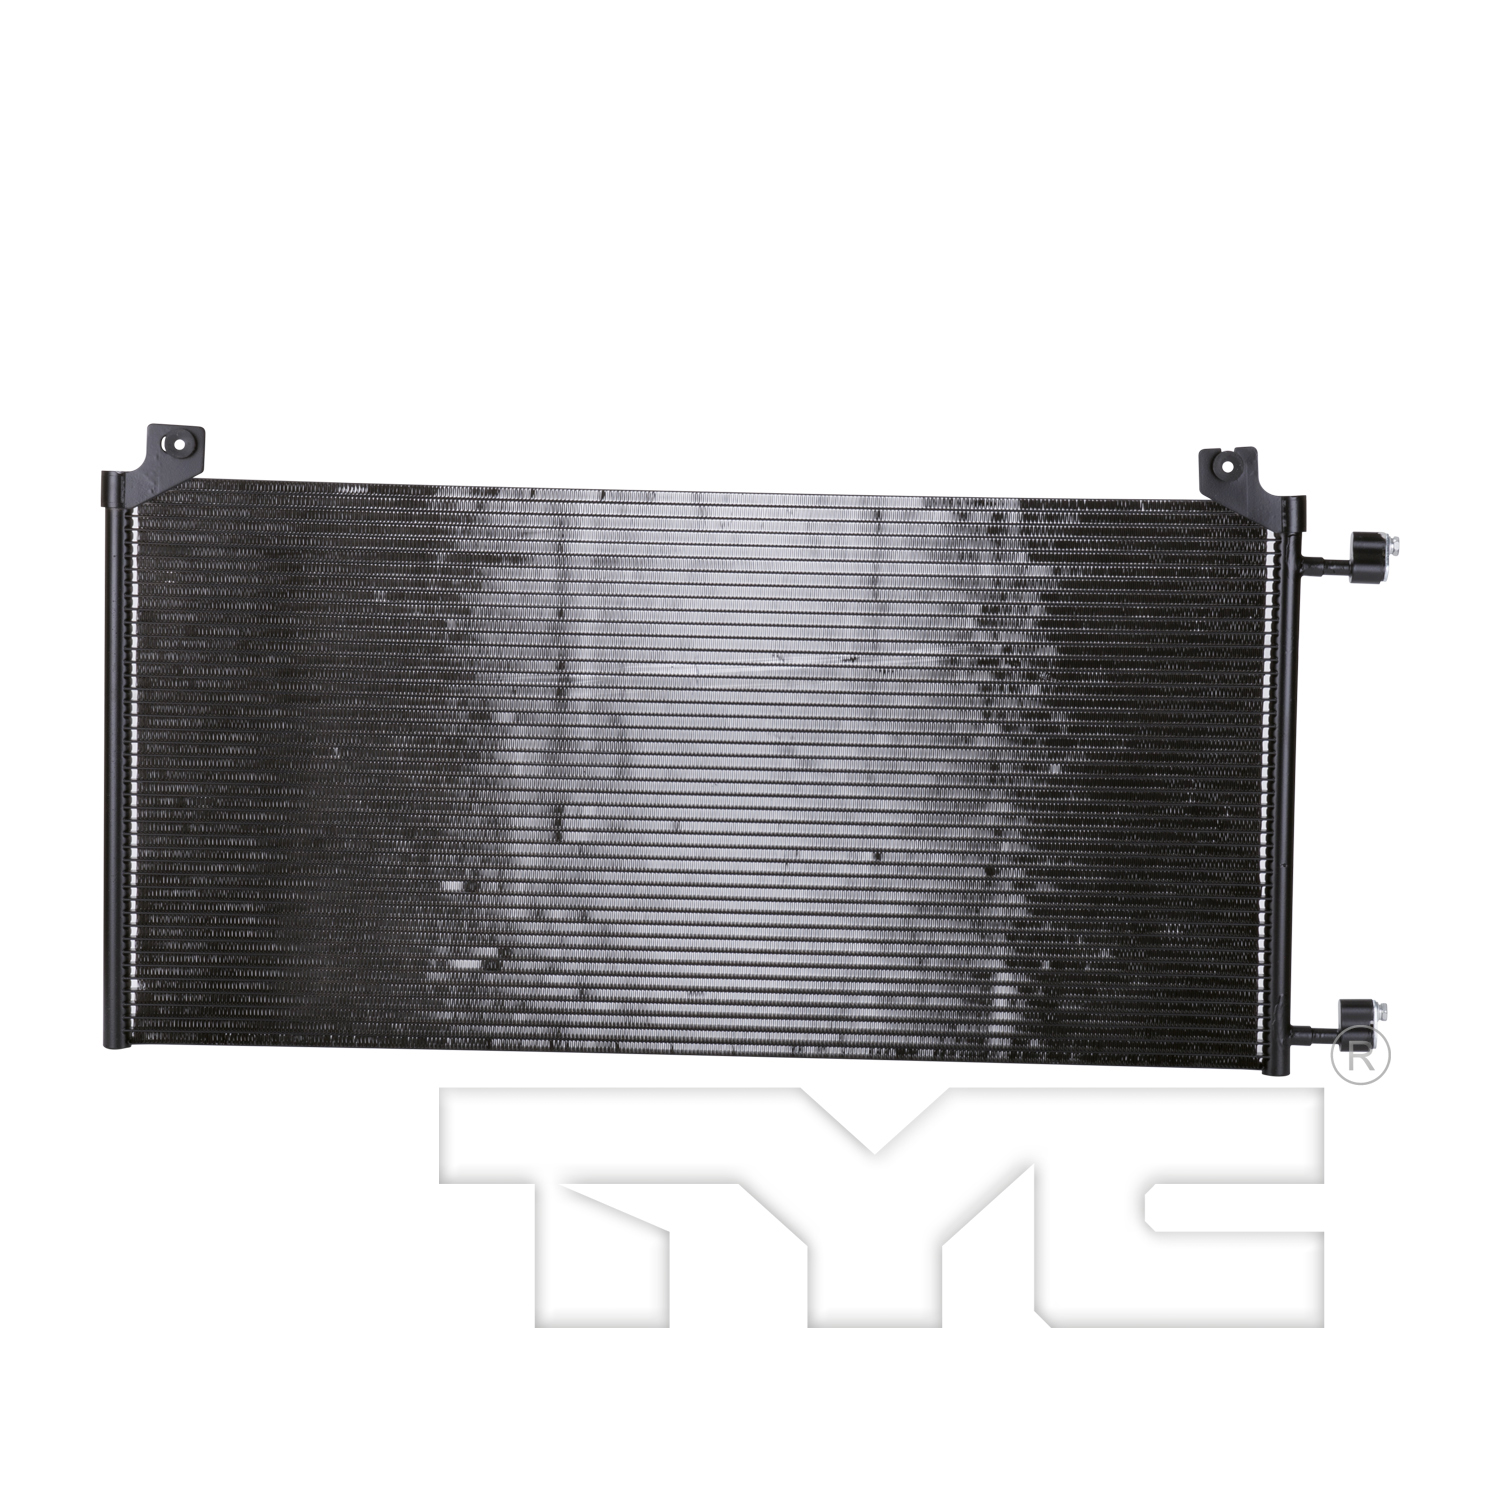 Aftermarket AC CONDENSERS for CHEVROLET - SUBURBAN 2500, SUBURBAN 2500,00-06,Air conditioning condenser